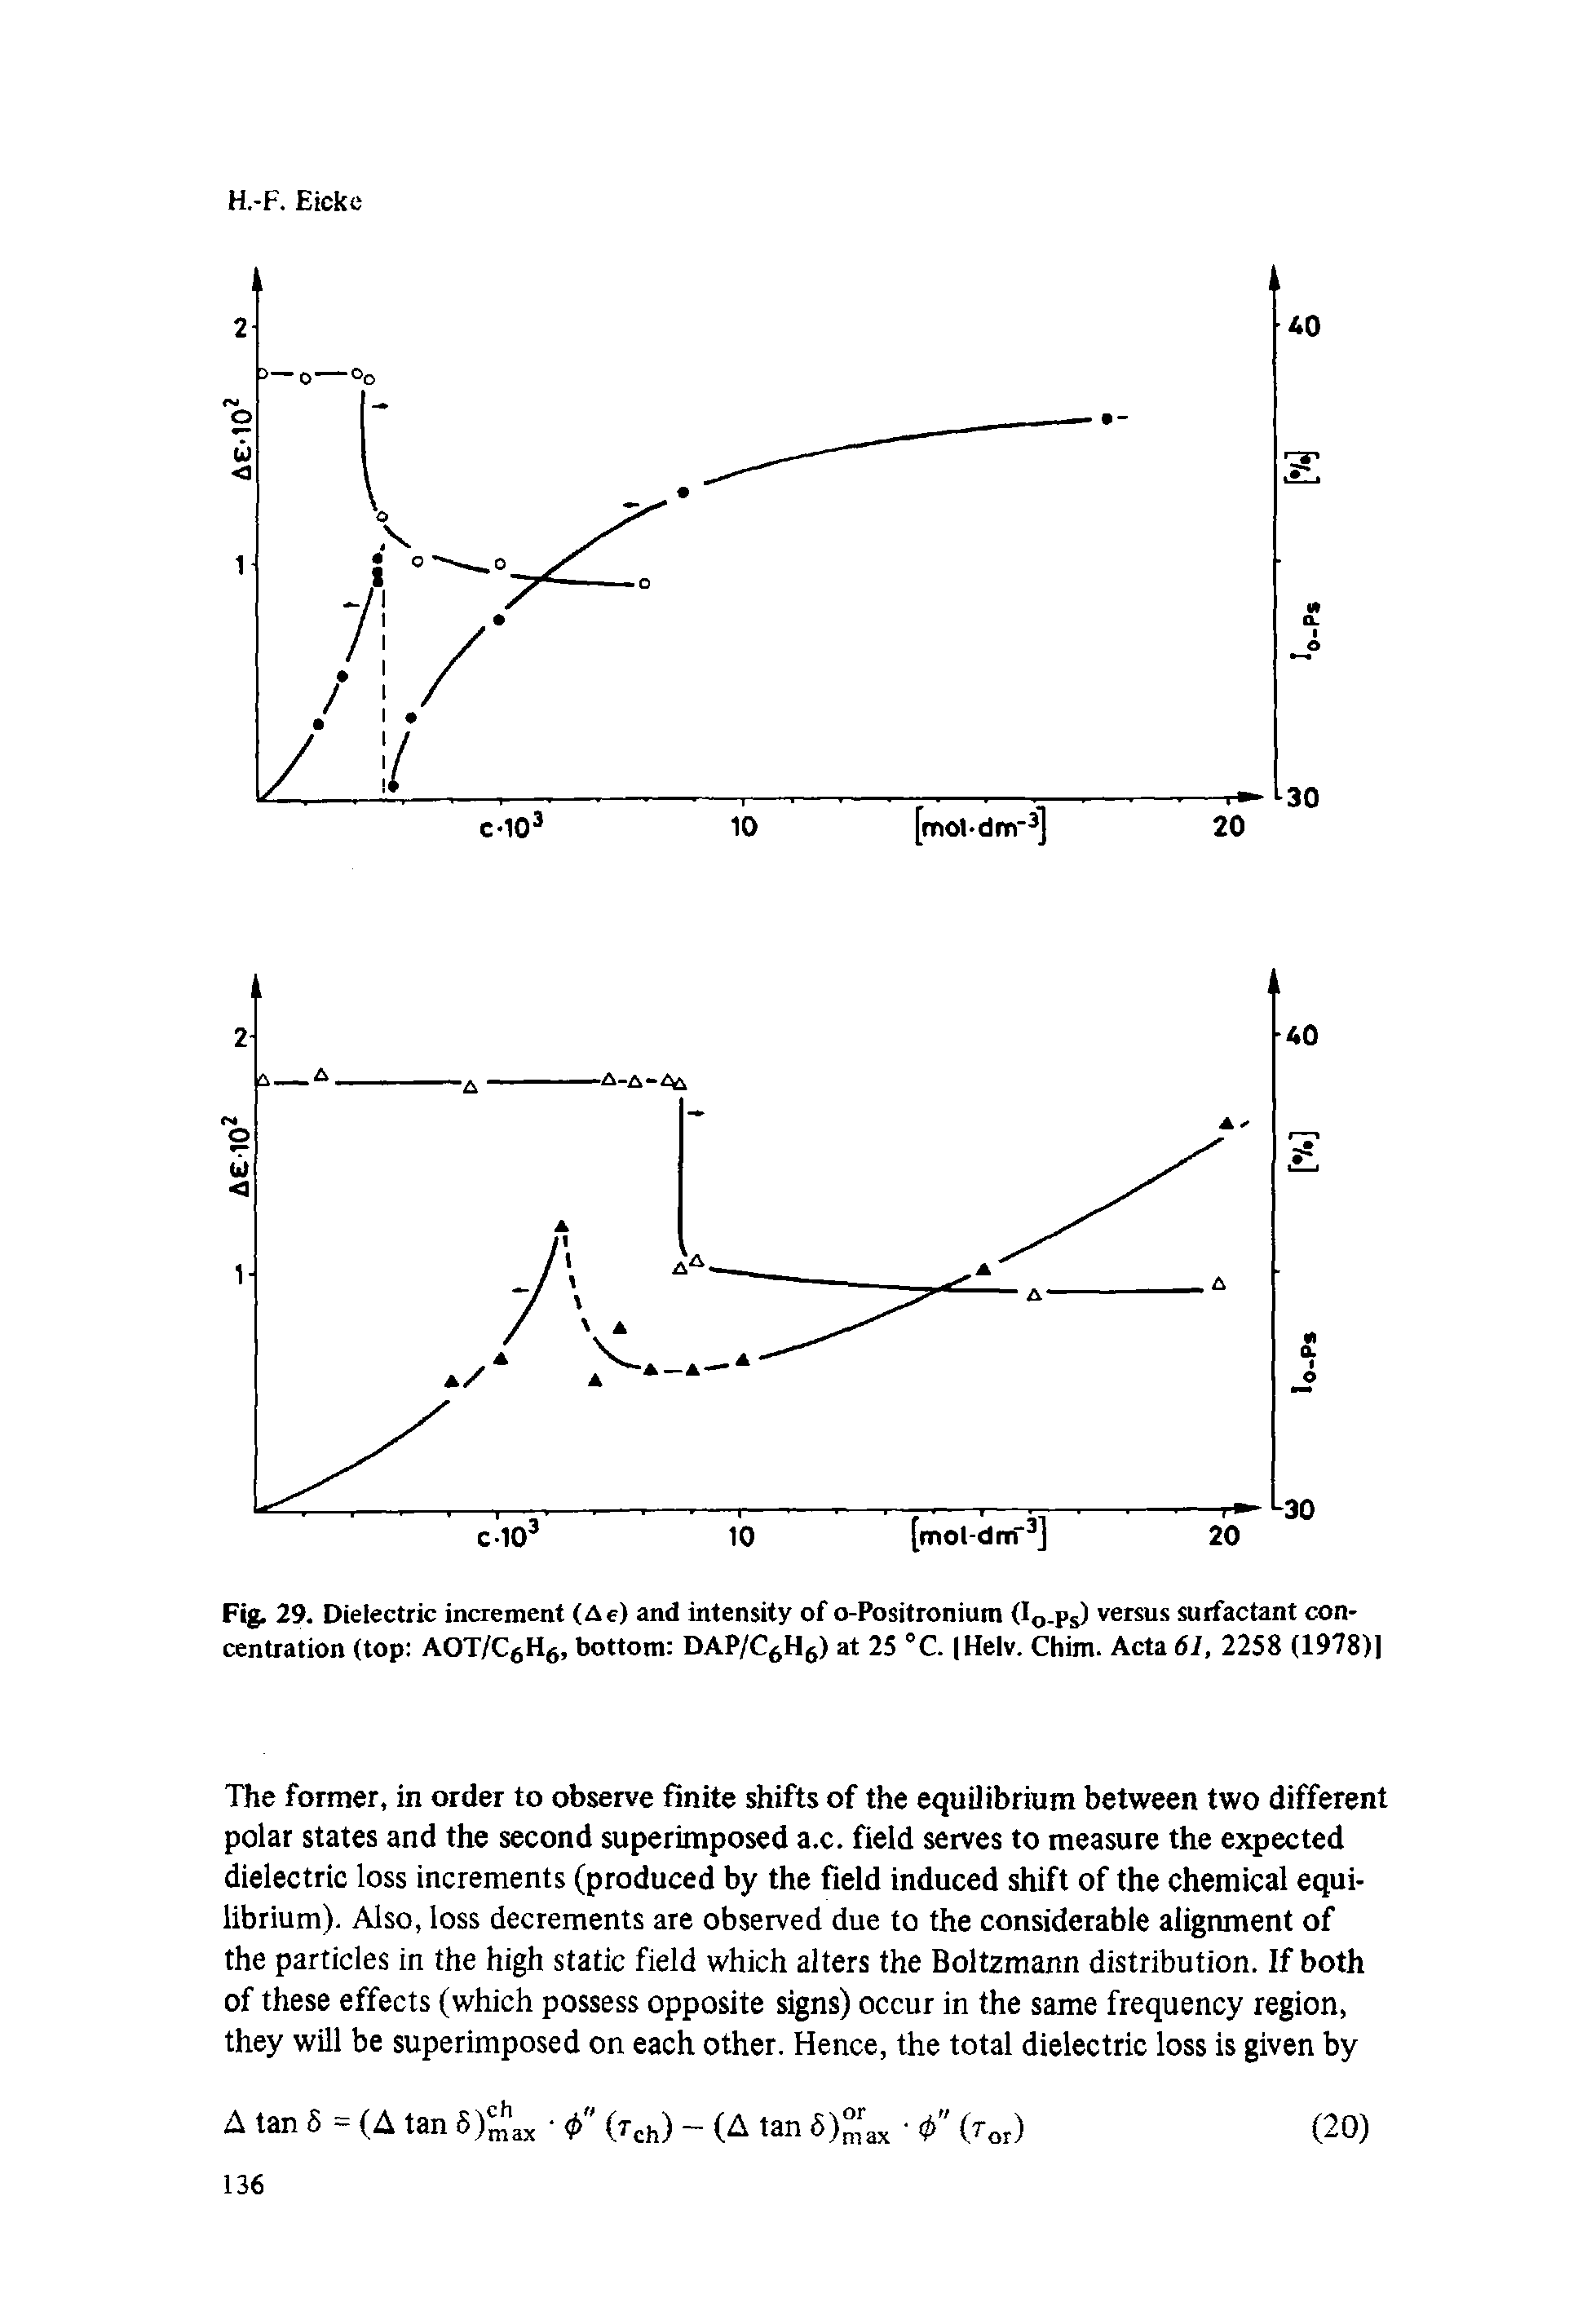 Fig. 29. Dielectric increment (Ae) and intensity of o-Positronium (IQ ps) versus surfactant concentration (top AOT/C6H6, bottom DAP/C6H6) at 25 °C. Helv. Chim. Acta 61, 2258 (1978)]...